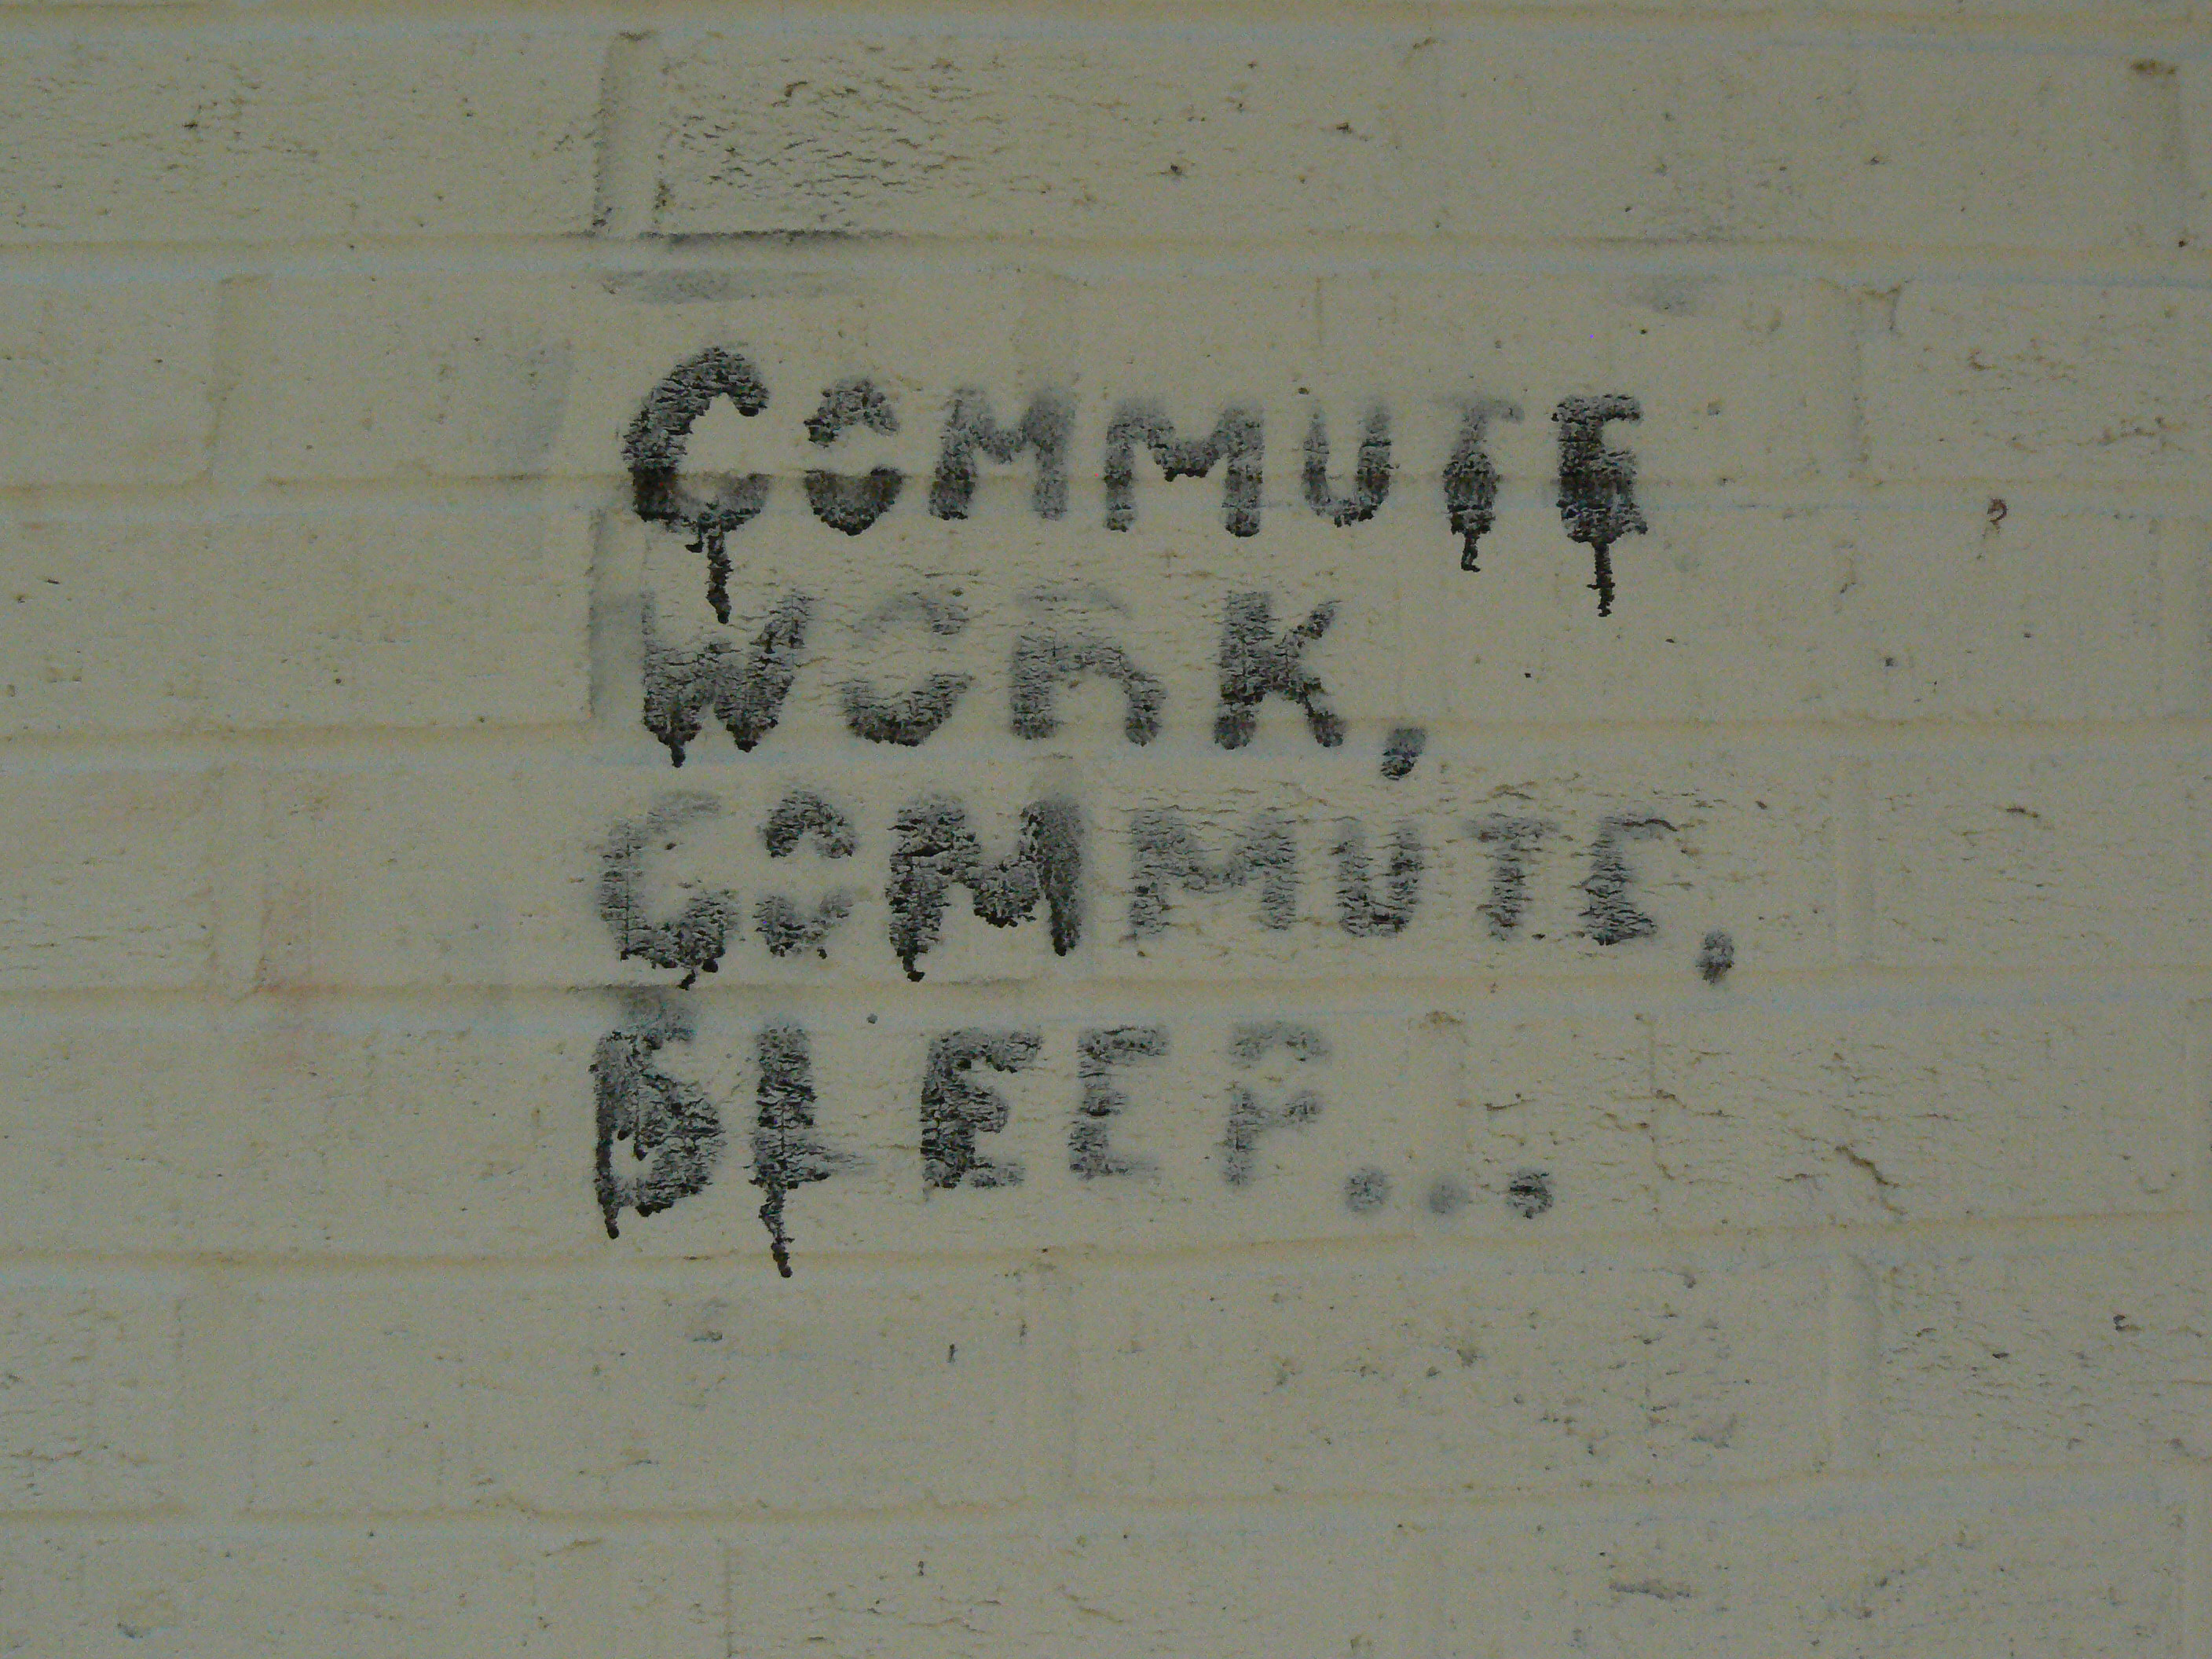 Commute Work Commute Sleep painted on white wall